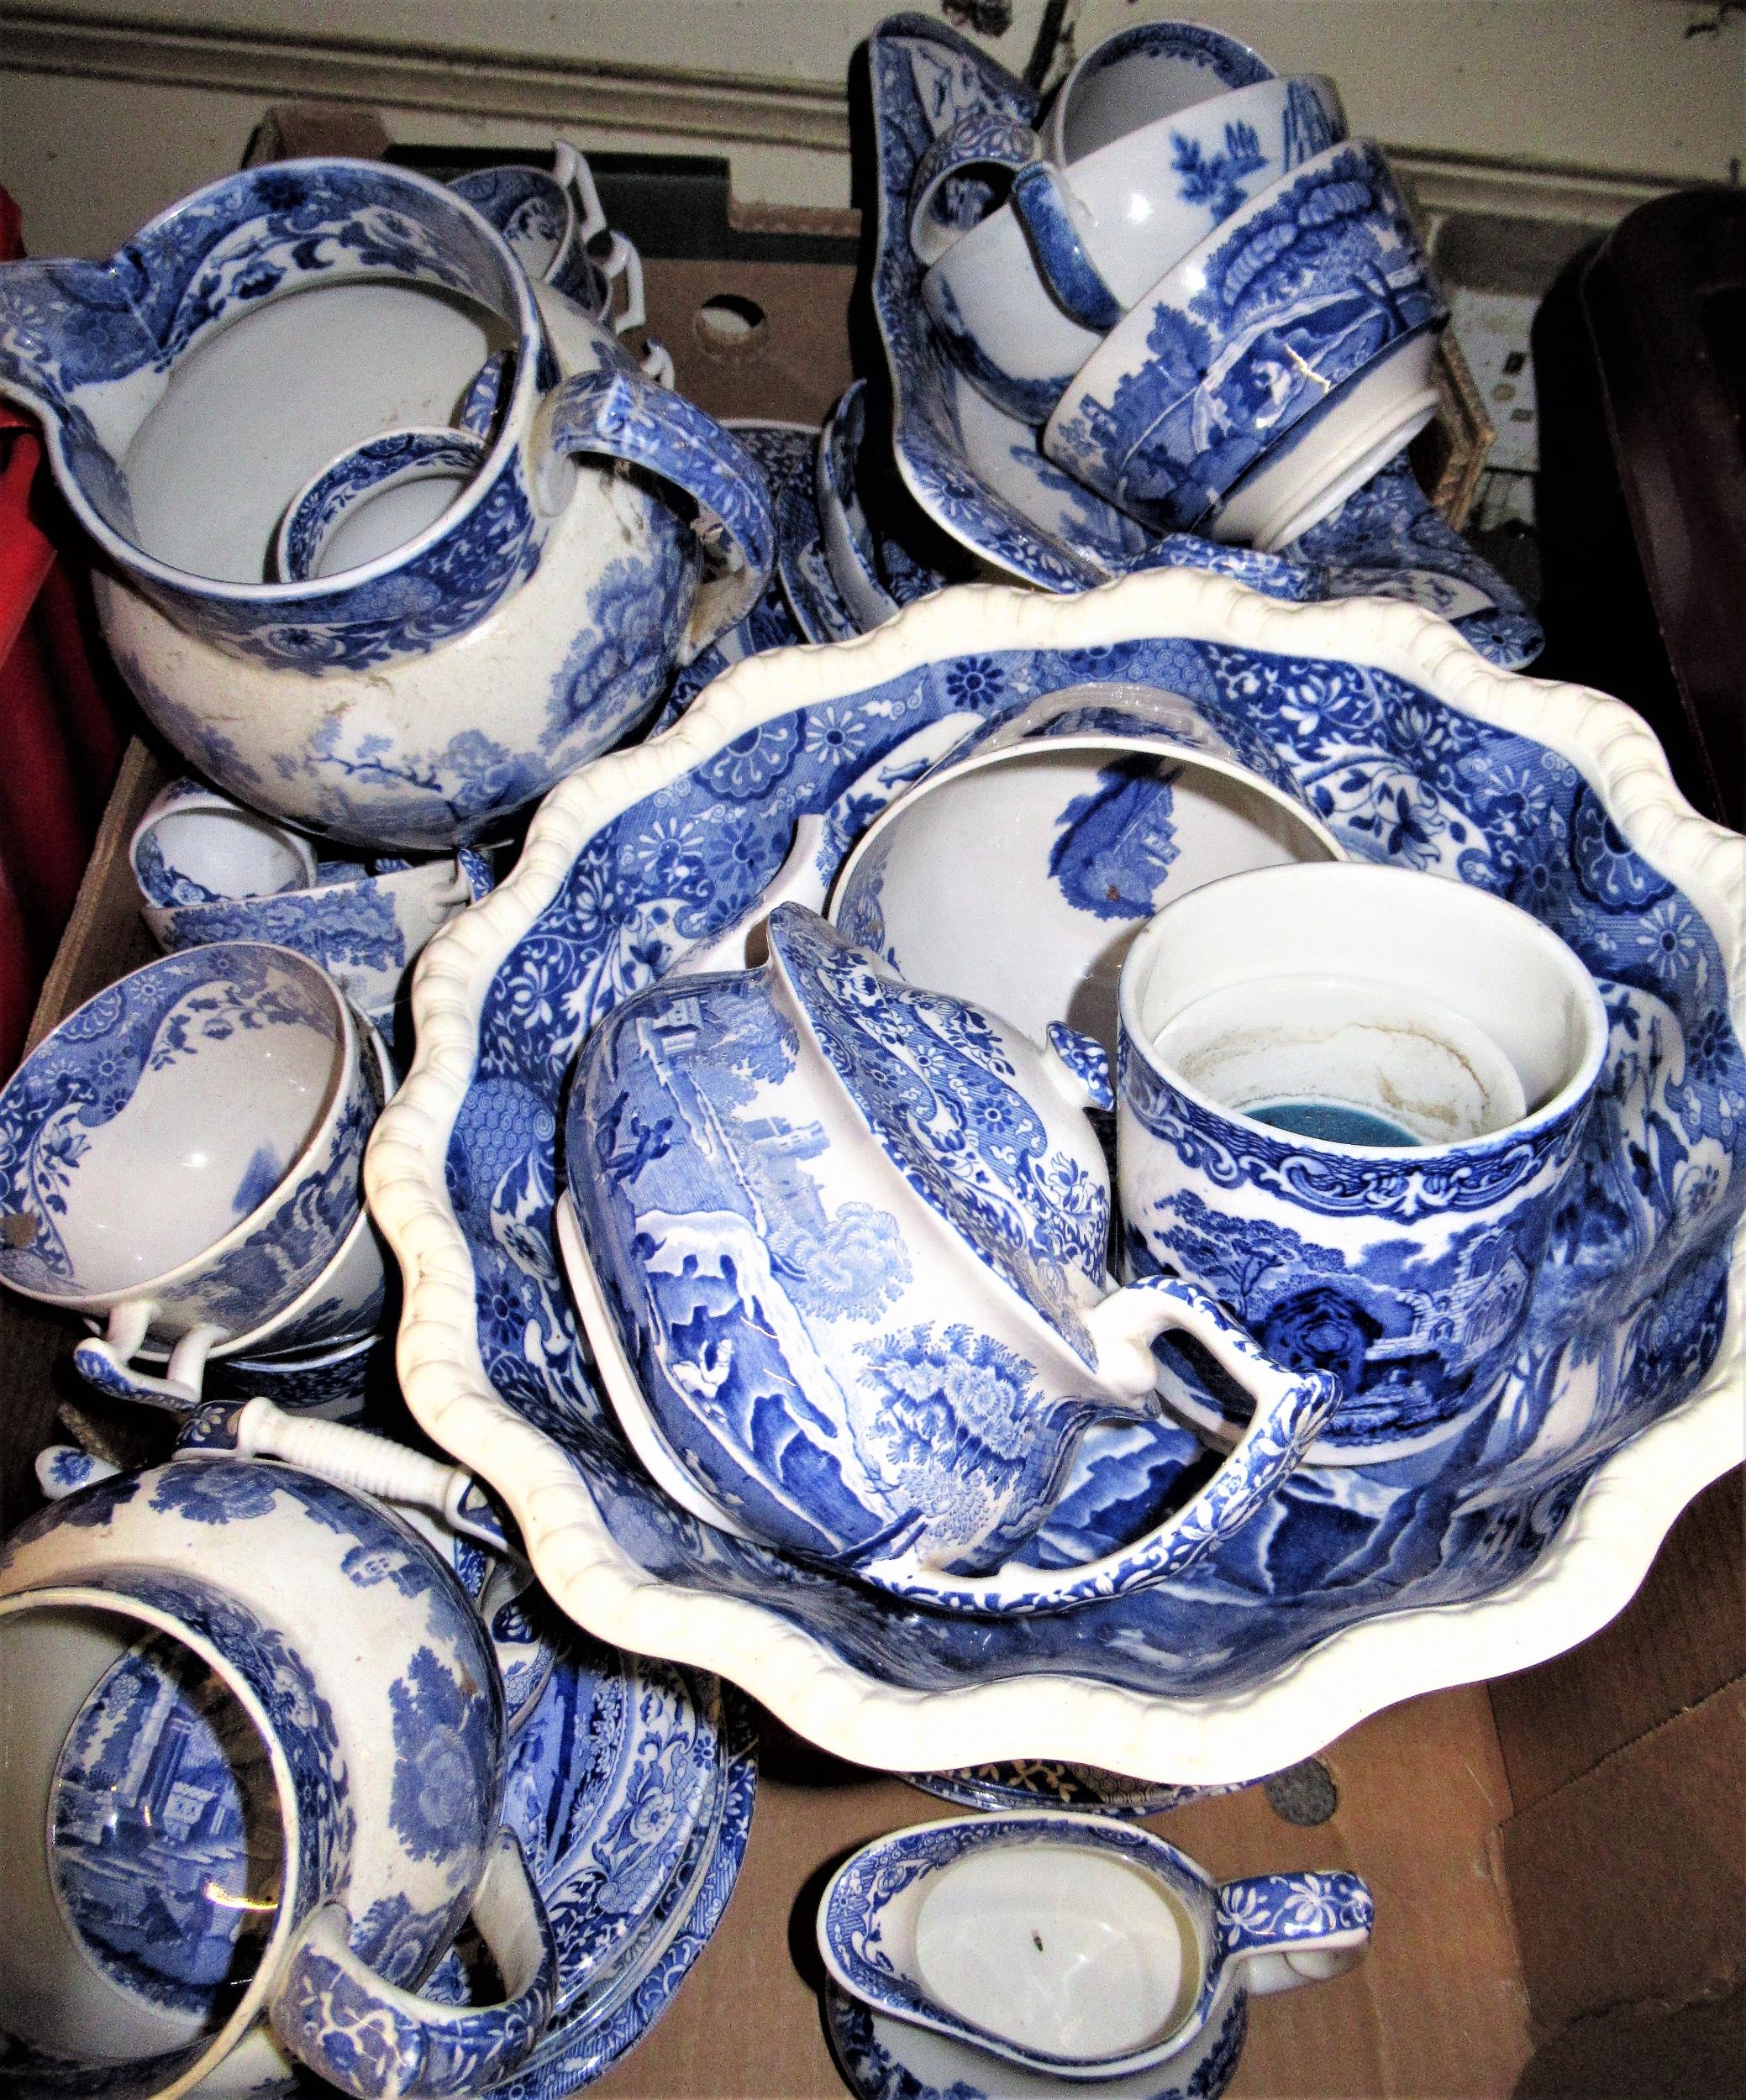 Large quantity of Copeland Spode blue and white Italian pattern transfer printed dinner, tea and - Image 2 of 3